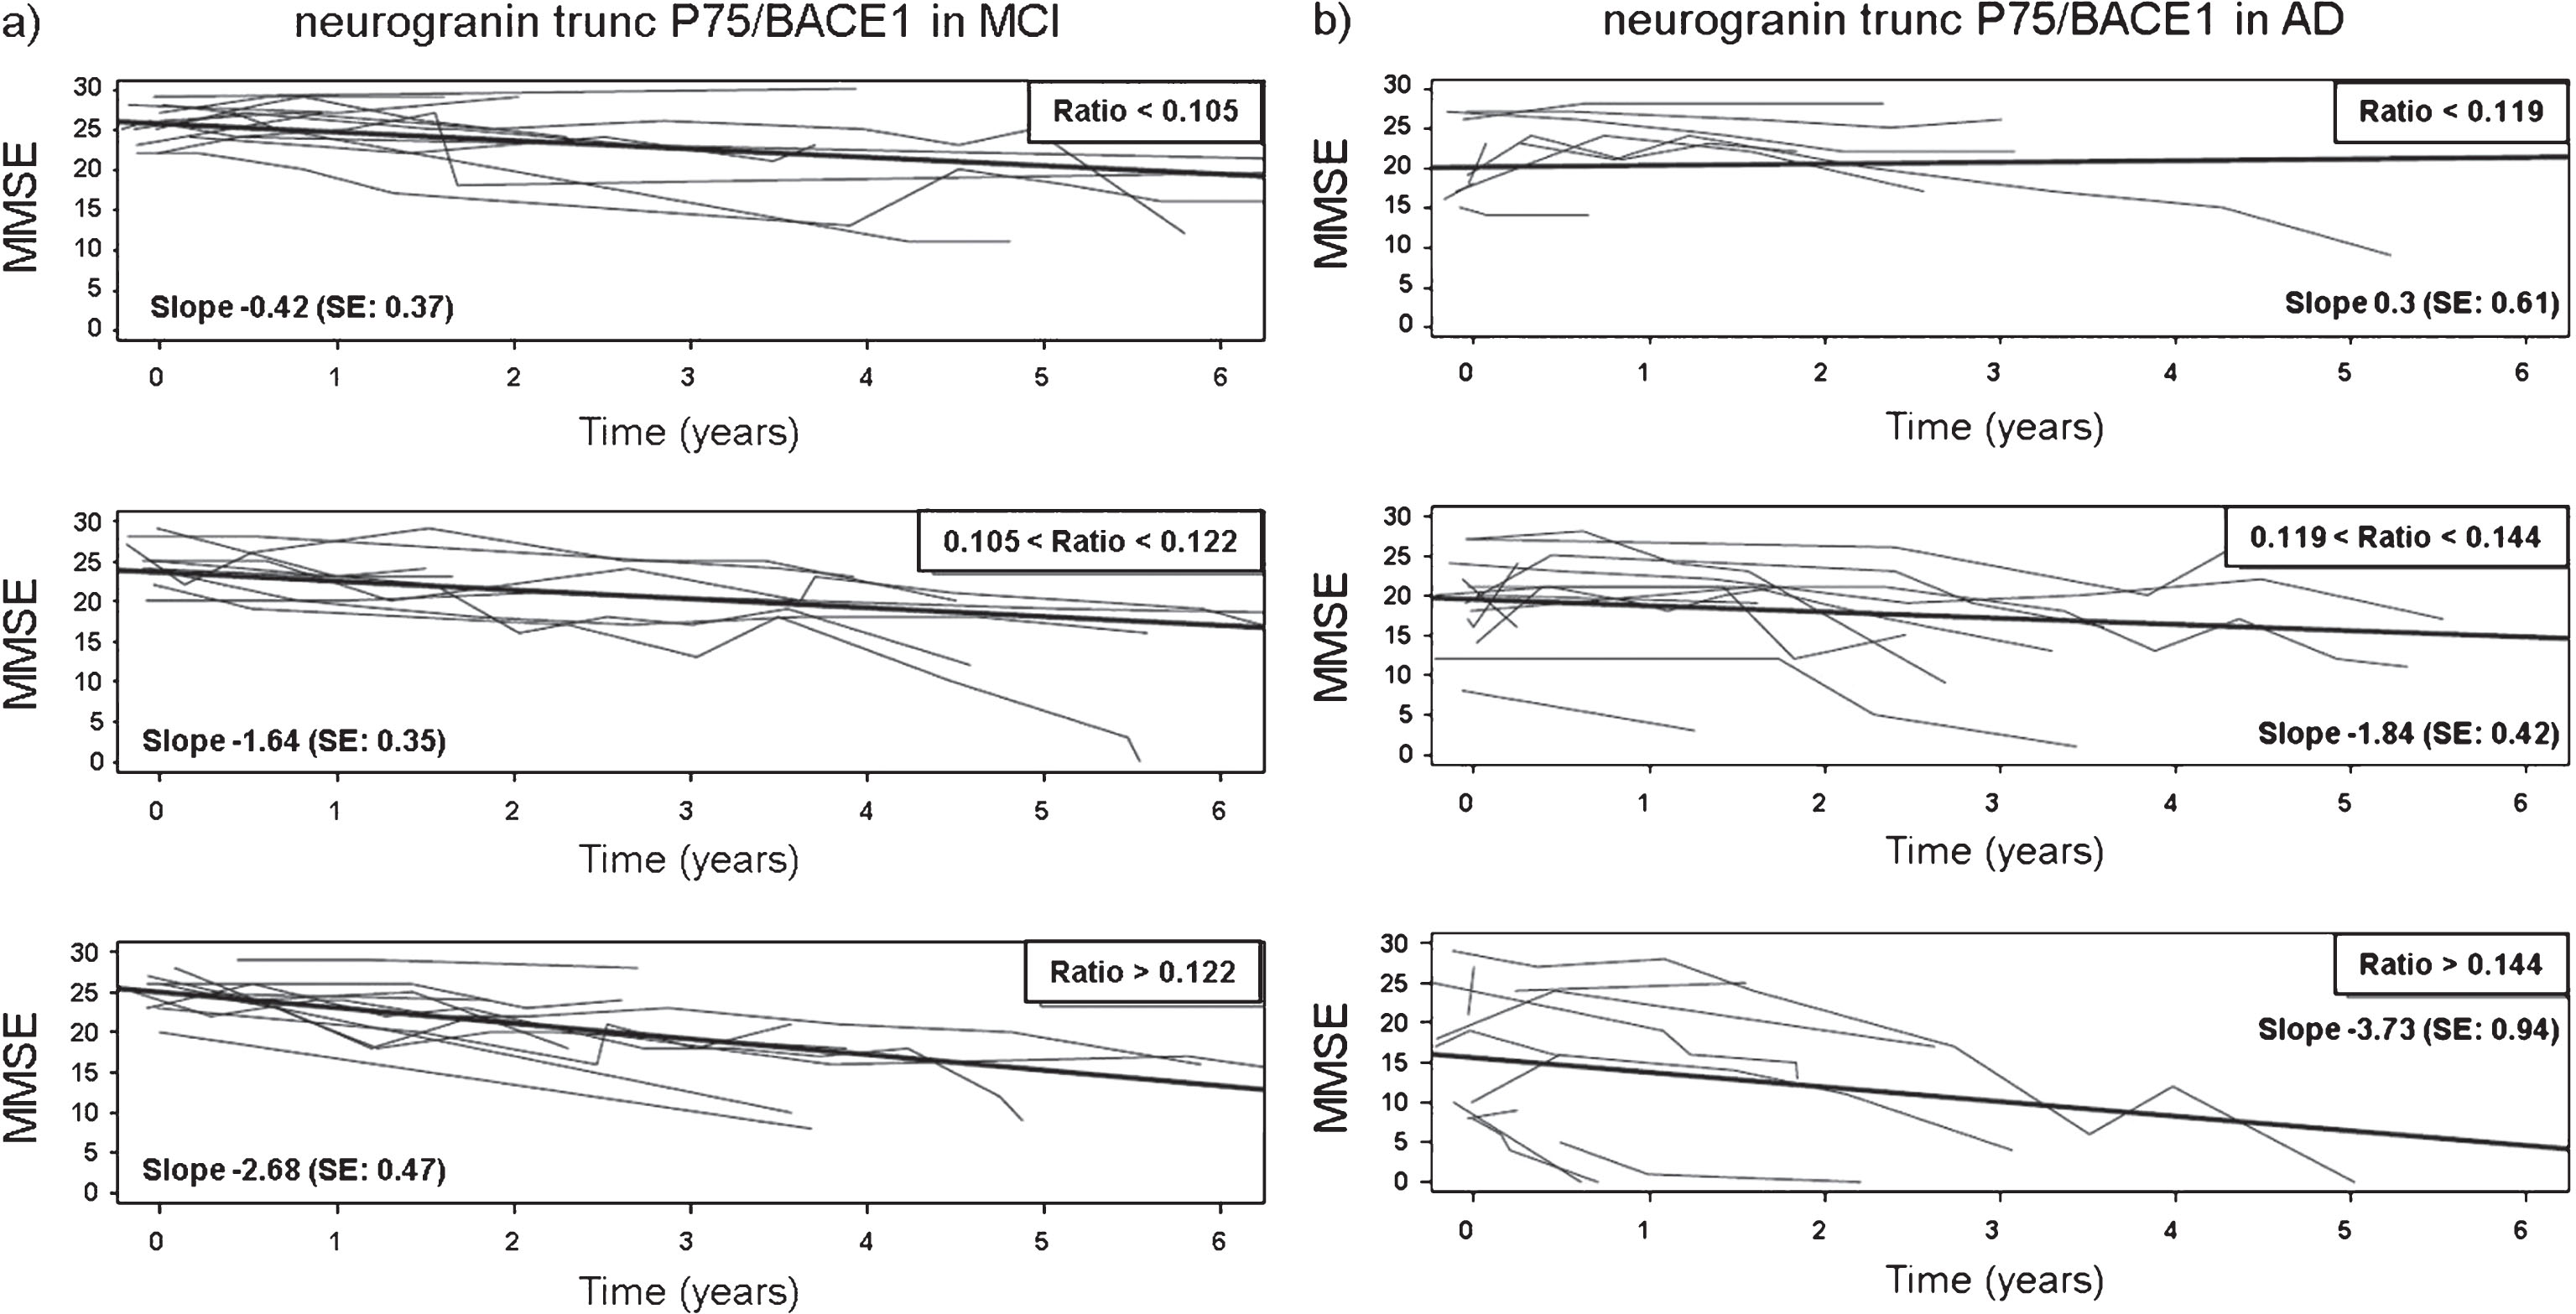 The subset of patients with MMSE at time of LP (time = 0) and/or after LP were divided into tertiles of the ratio levels to illustrate the effect of the CSF neurogranin trunc P75/BACE1 levels on evolution of MMSE over time. The panels show the low (upper panels), medium (mid panels), and high (lower panels) range of levels of CSF neurogranin trunc P75/BACE1. Separate panels were created for both MCI (a) and AD patients (b). For both the MCI and AD group, the observed MMSE was plotted versus time for each range. The thin lines represent the observed MMSE data for individual patients, (upper panels: MCI: n = 11, AD: n = 9; mid panels: MCI: n = 9, AD: n = 11; lower panels: MCI: n = 11, AD: n = 11) the thick lines symbolize the linear regression line of mean MMSE versus time. Patients where MMSE scores at time of LP were available but not post-LP, were included to delineate the tertiles. However, these individuals were not represented by a thin line, since no longitudinal data post-LP was collected in these cases.